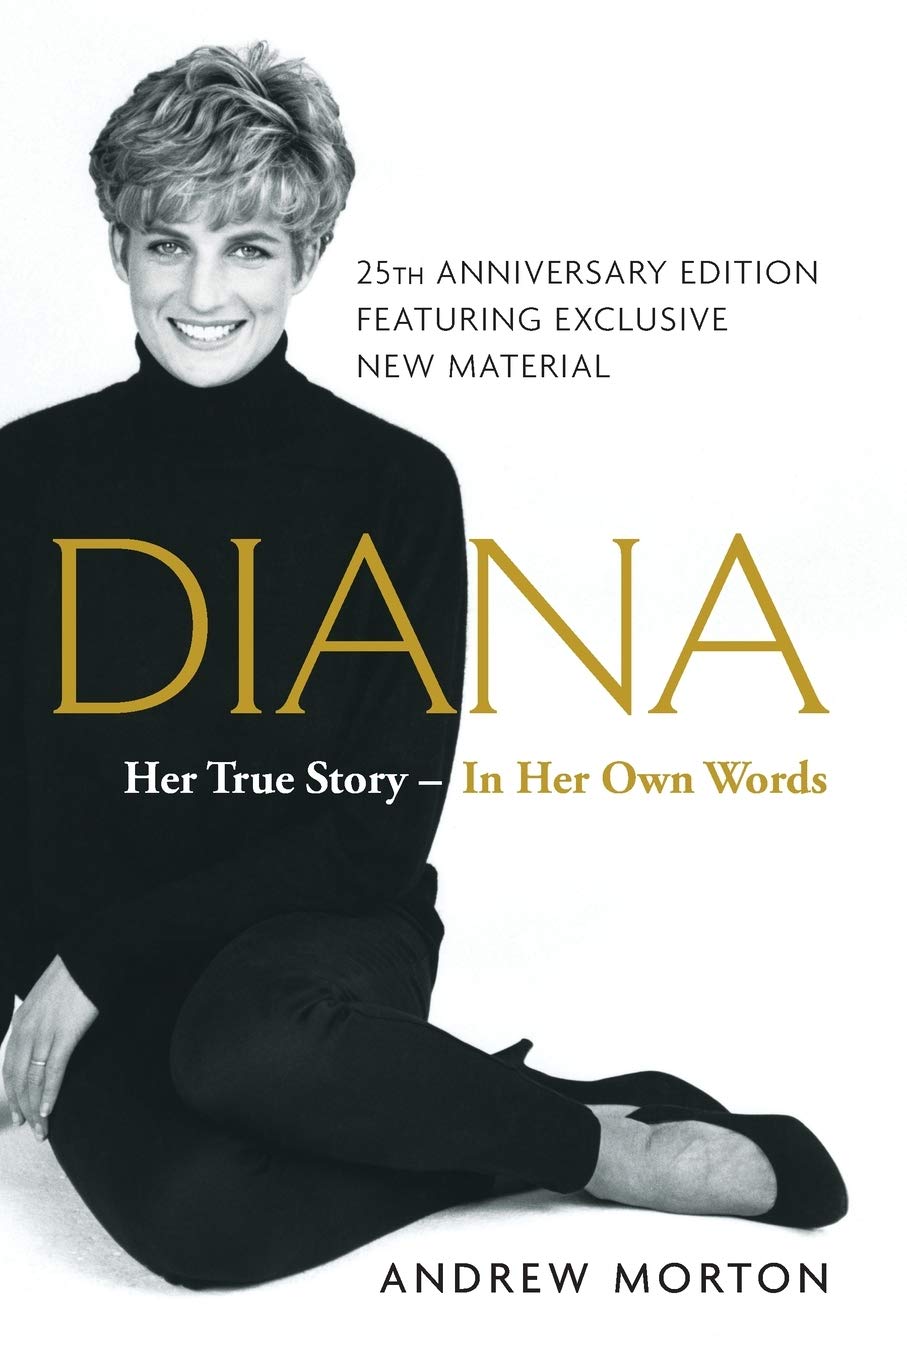 Image for "Diana"